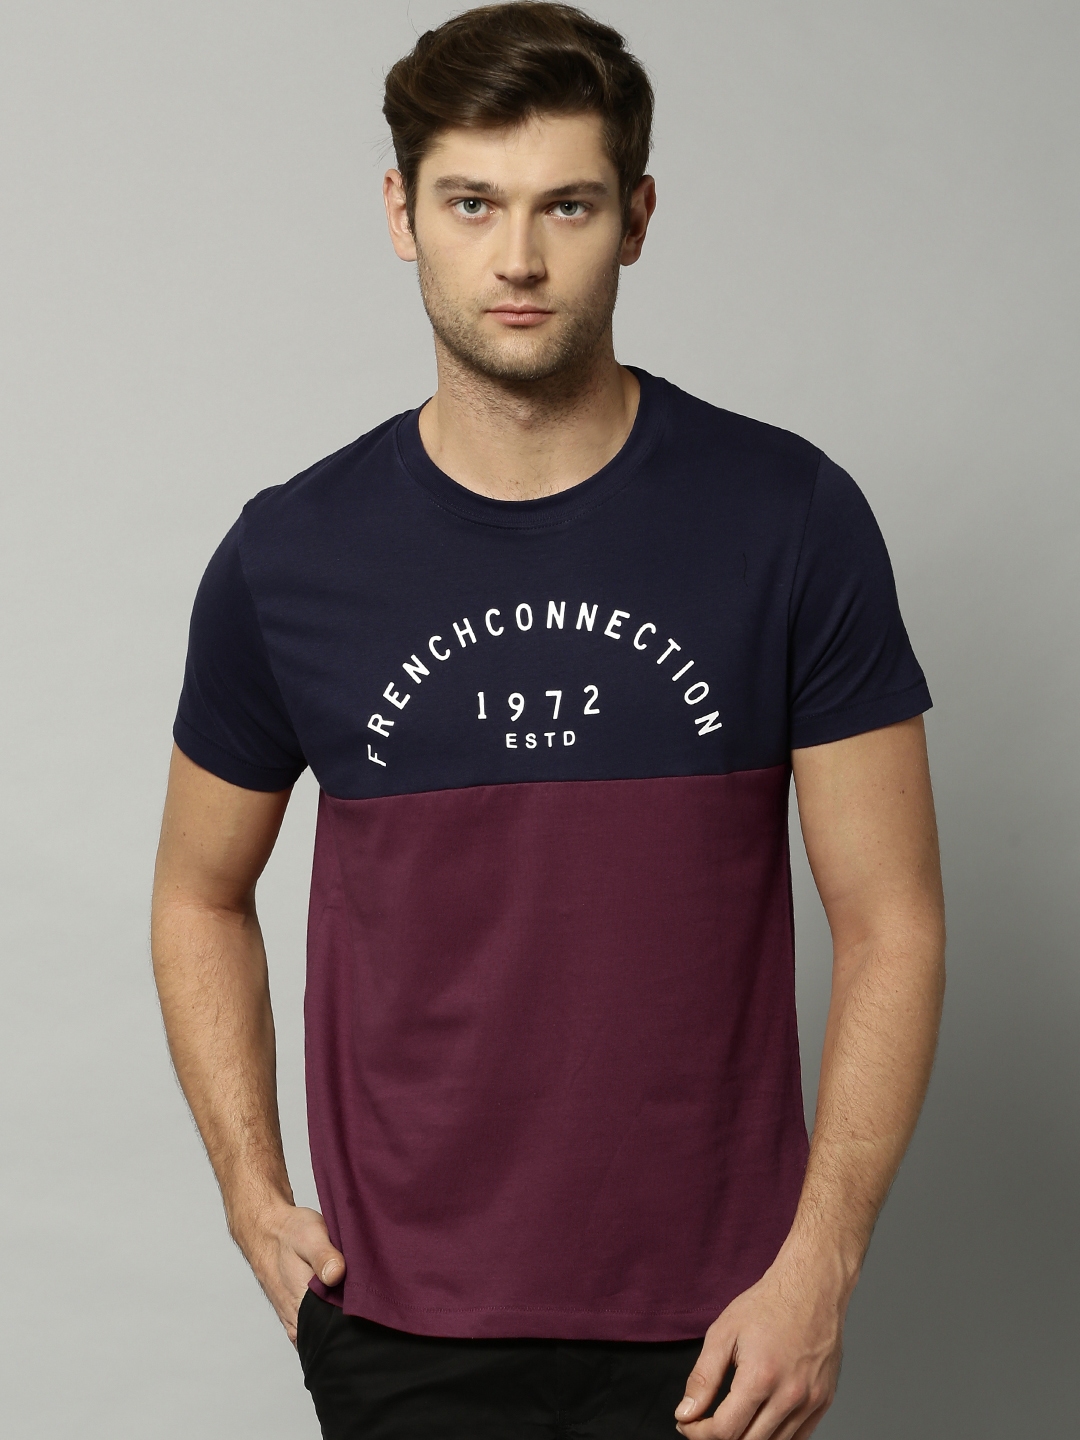 Buy French Connection Men Burgundy & Navy Colourblocked T Shirt ...